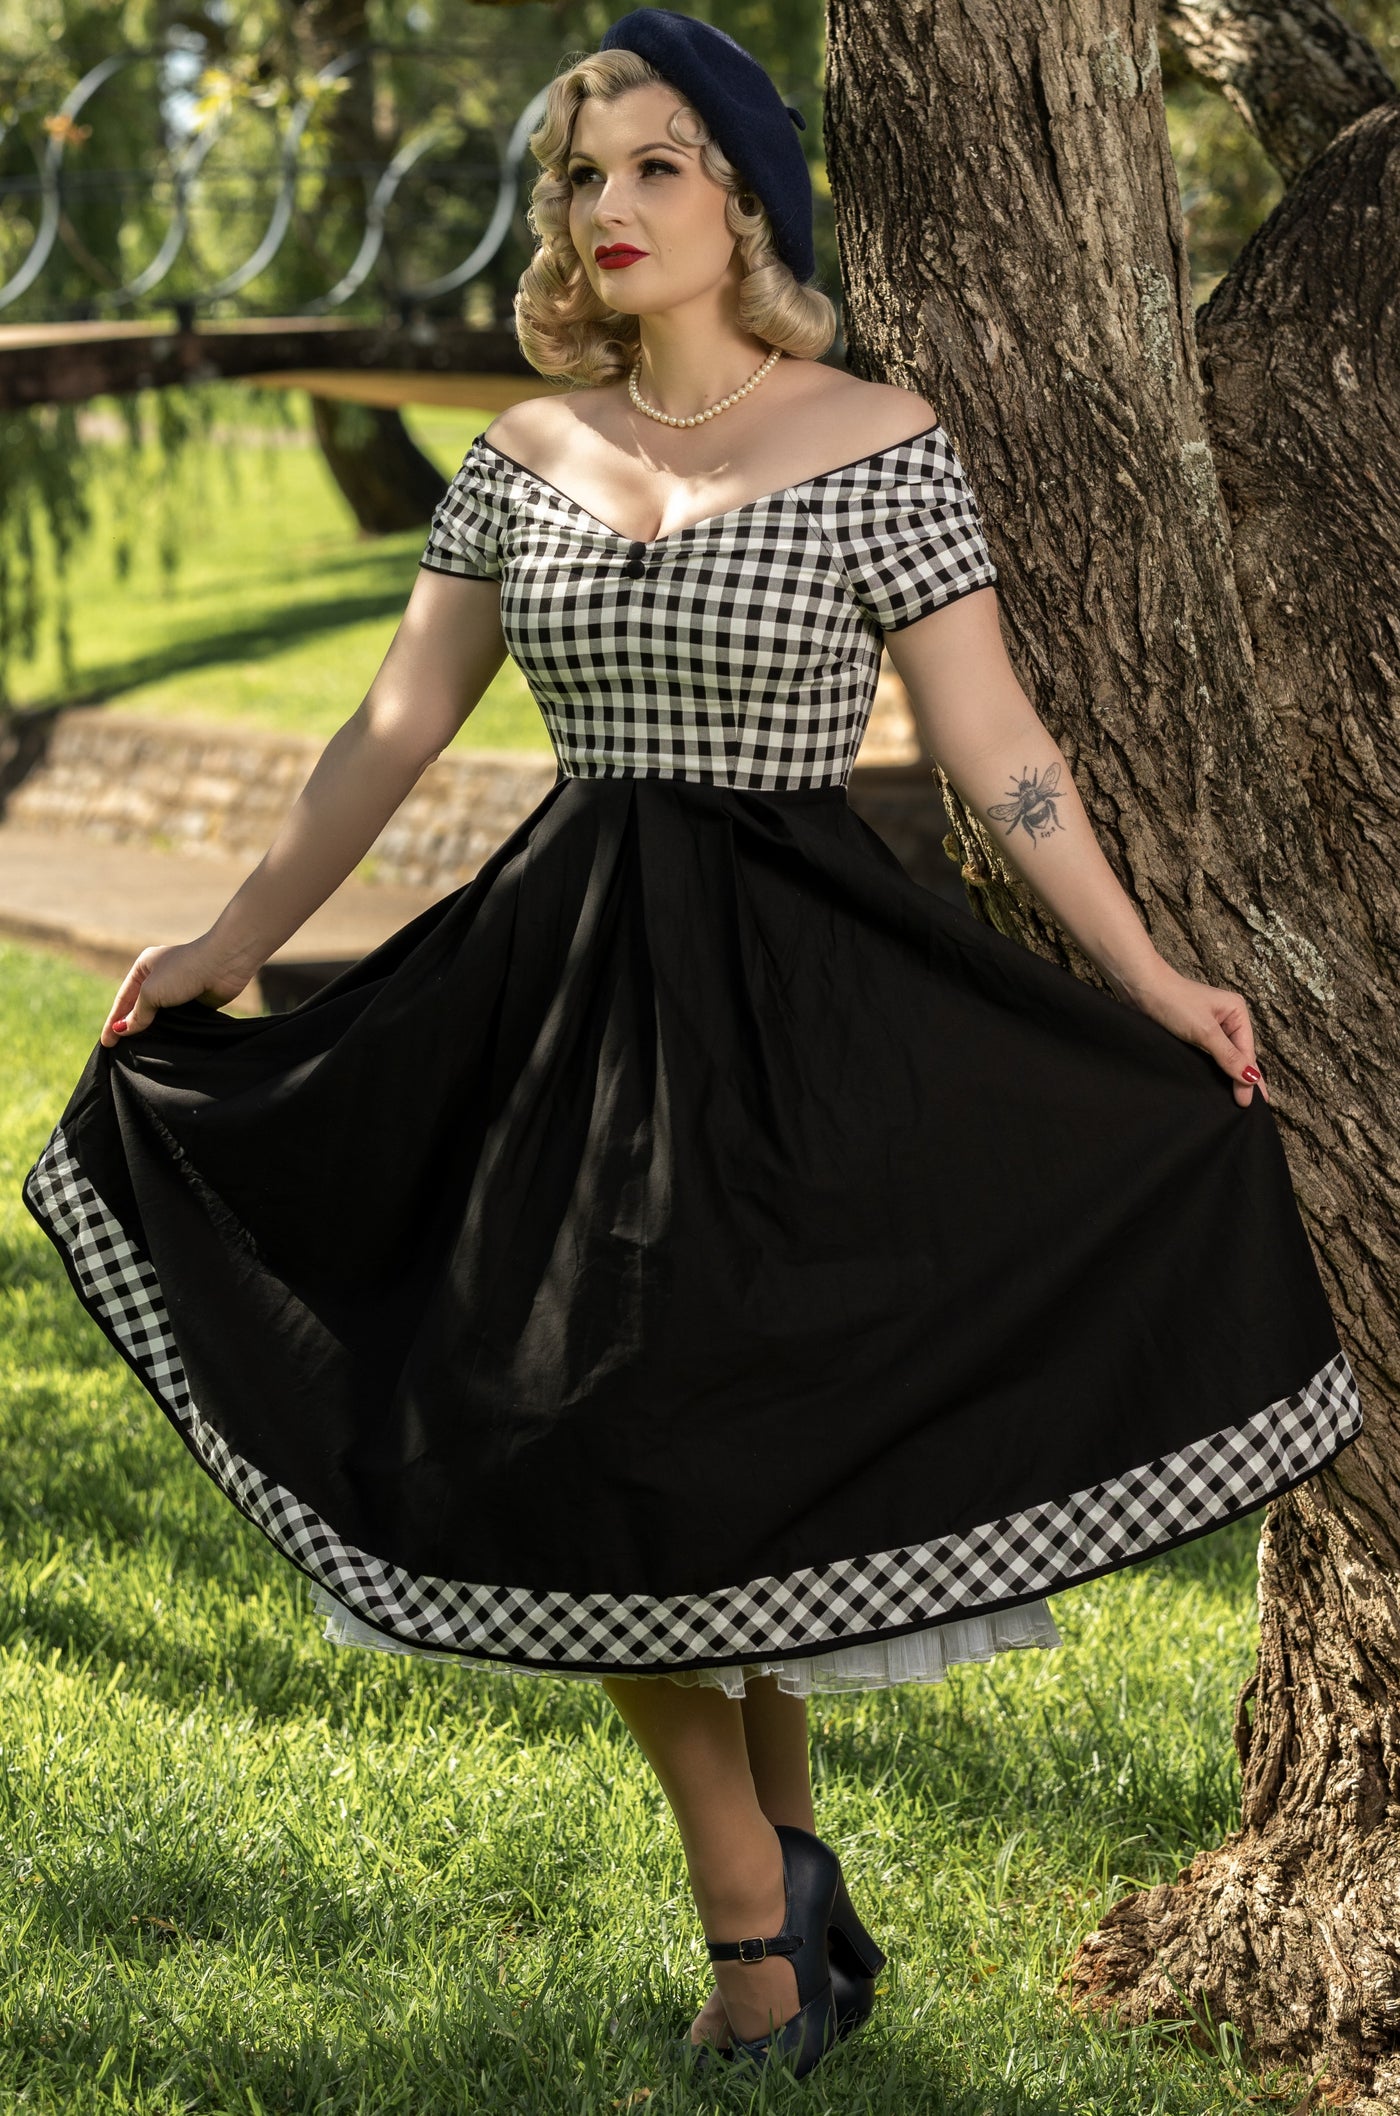 Model wearing black and white gingham swing dress, in front of a tree